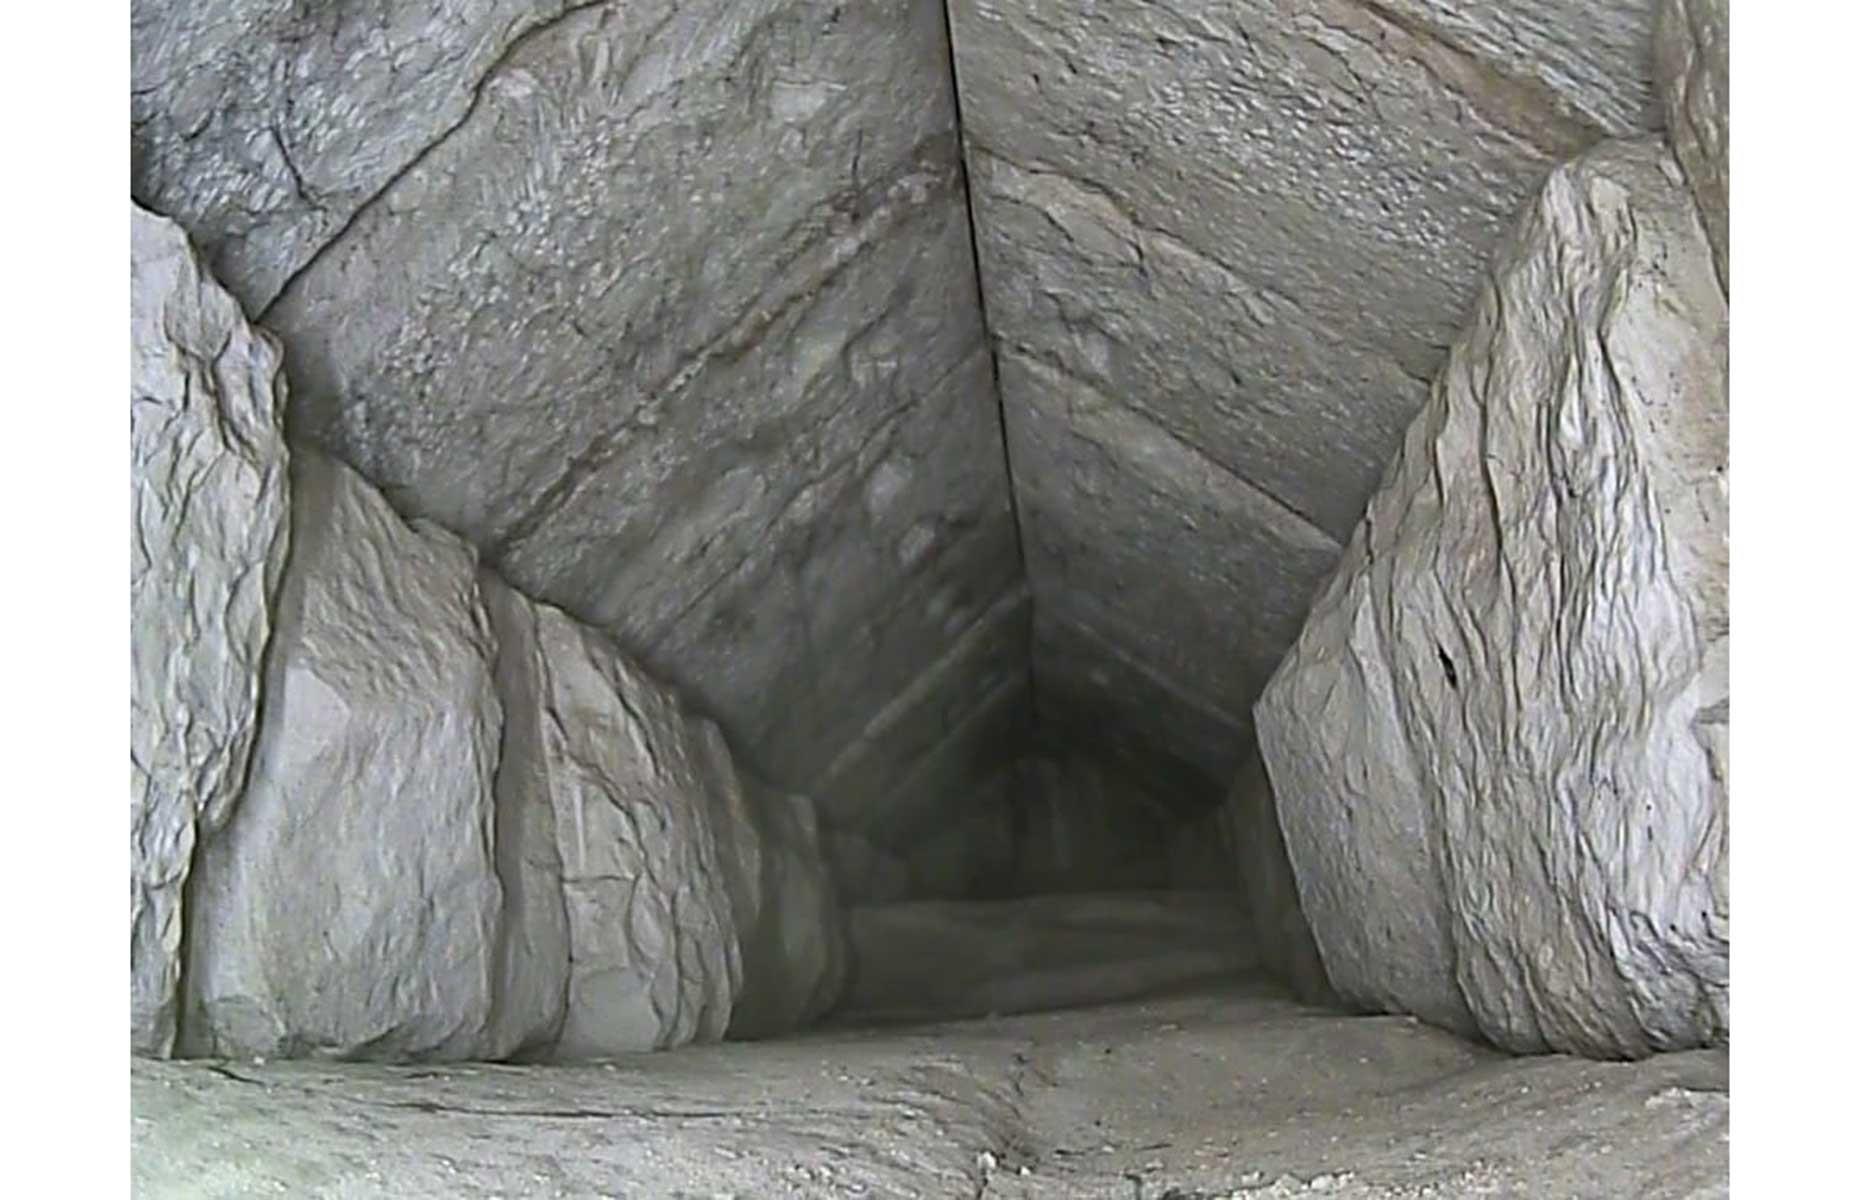 <p>The tunnel (pictured) measures 30 feet (9m) long and at least six feet (1.8m) wide, and is perched above the pyramid's main entrance on its northern side. This image was collected by feeding a minuscule endoscope (camera) through a tiny gap in the pyramid's masonry, and reveals an end chamber marked by two rough limestones. As for its purpose, all anyone can do at present is speculate, and theories range from a secret burial chamber to an architectural space designed to redistribute weight around the structure.</p>